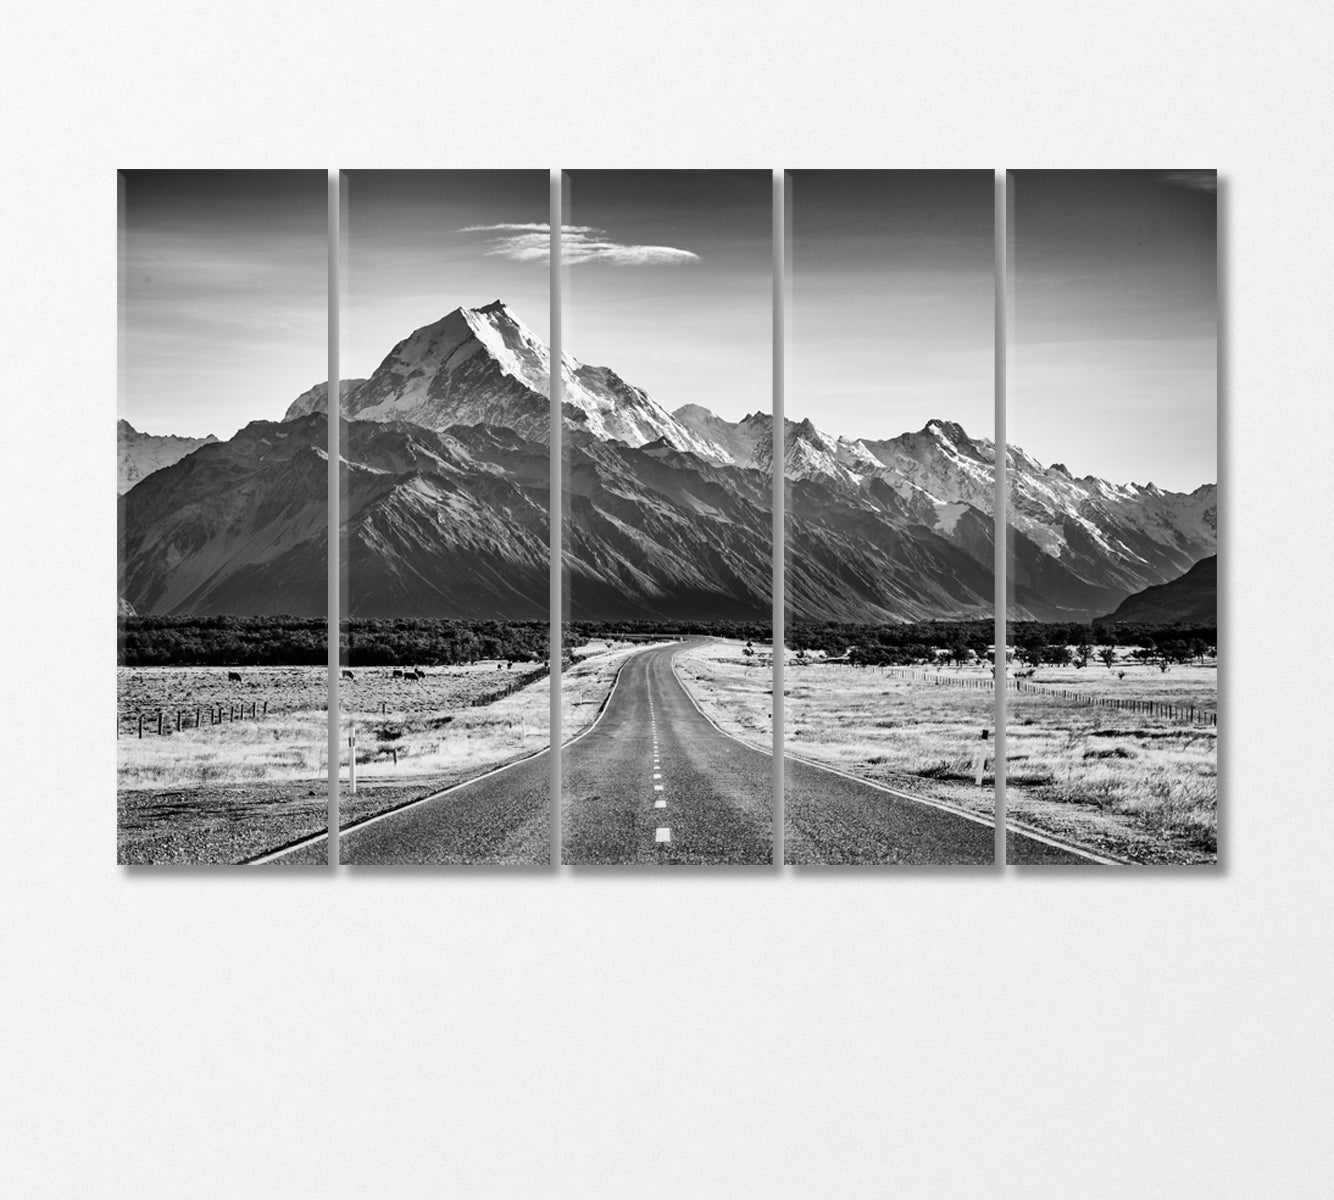 Road Leading Towards a Large Snow Capped Mountain Canvas Print-Canvas Print-CetArt-5 Panels-36x24 inches-CetArt